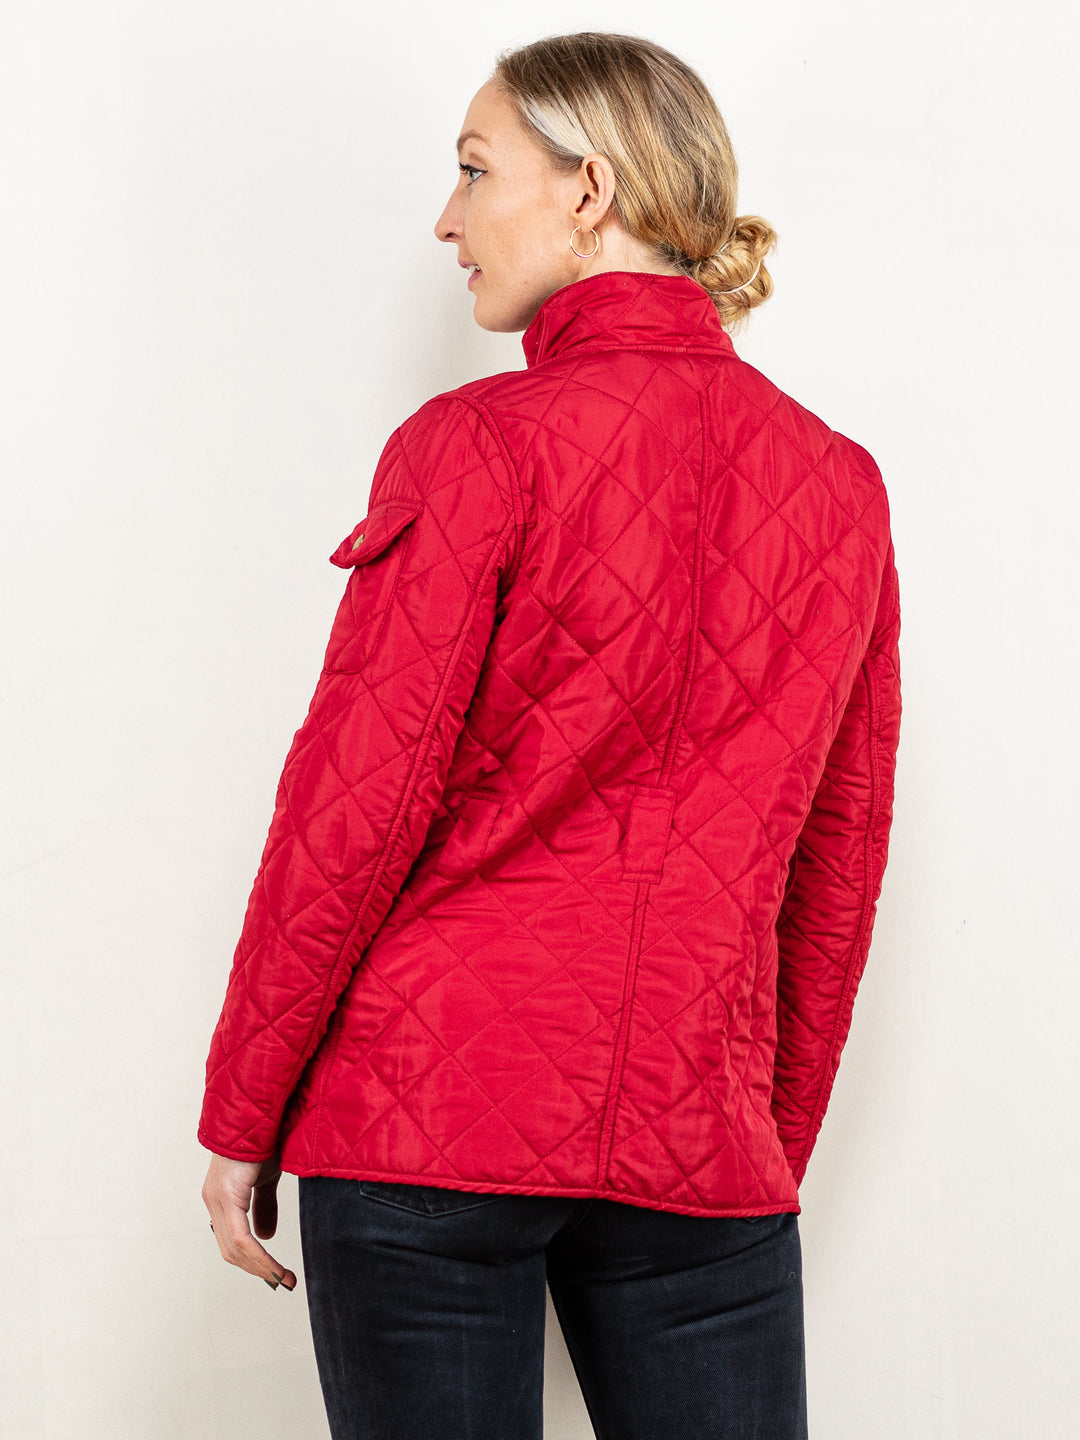 Barbour Polarquilt Jacket women vintage 00's red diamond quilt royal family fleece lined layering slim fitting size small S